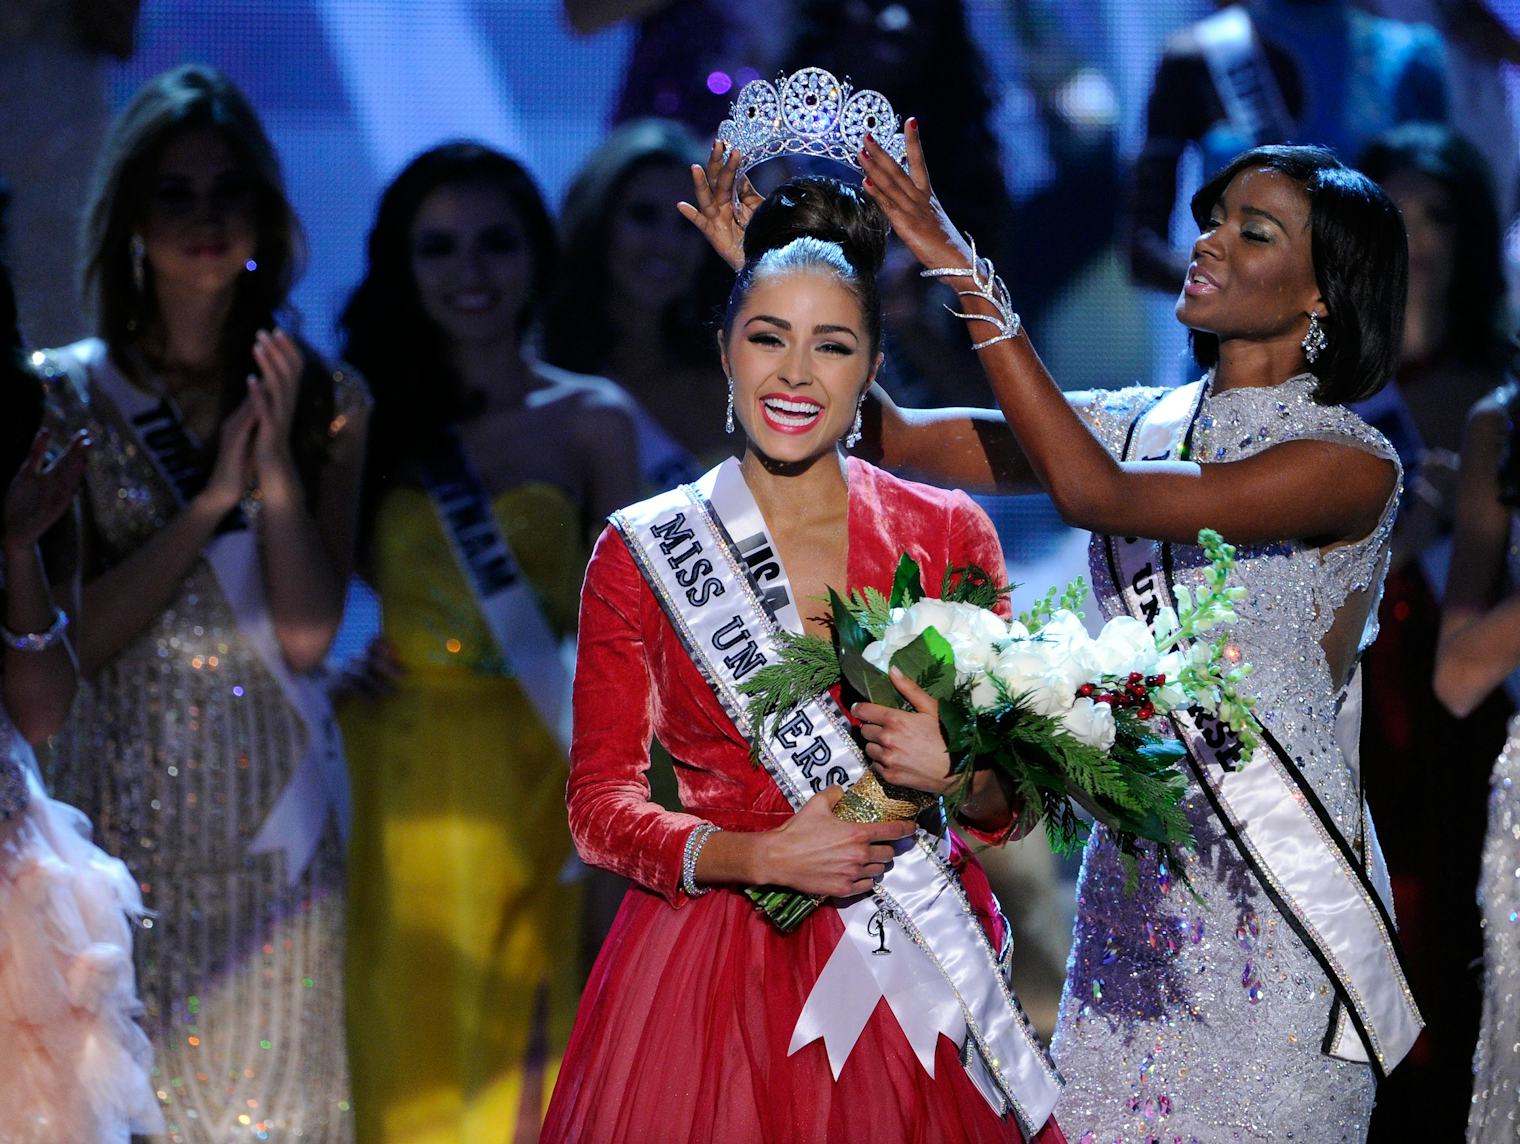 Who Are The Miss USA 2015 Judges? They’ve Been On The Other Side Of The